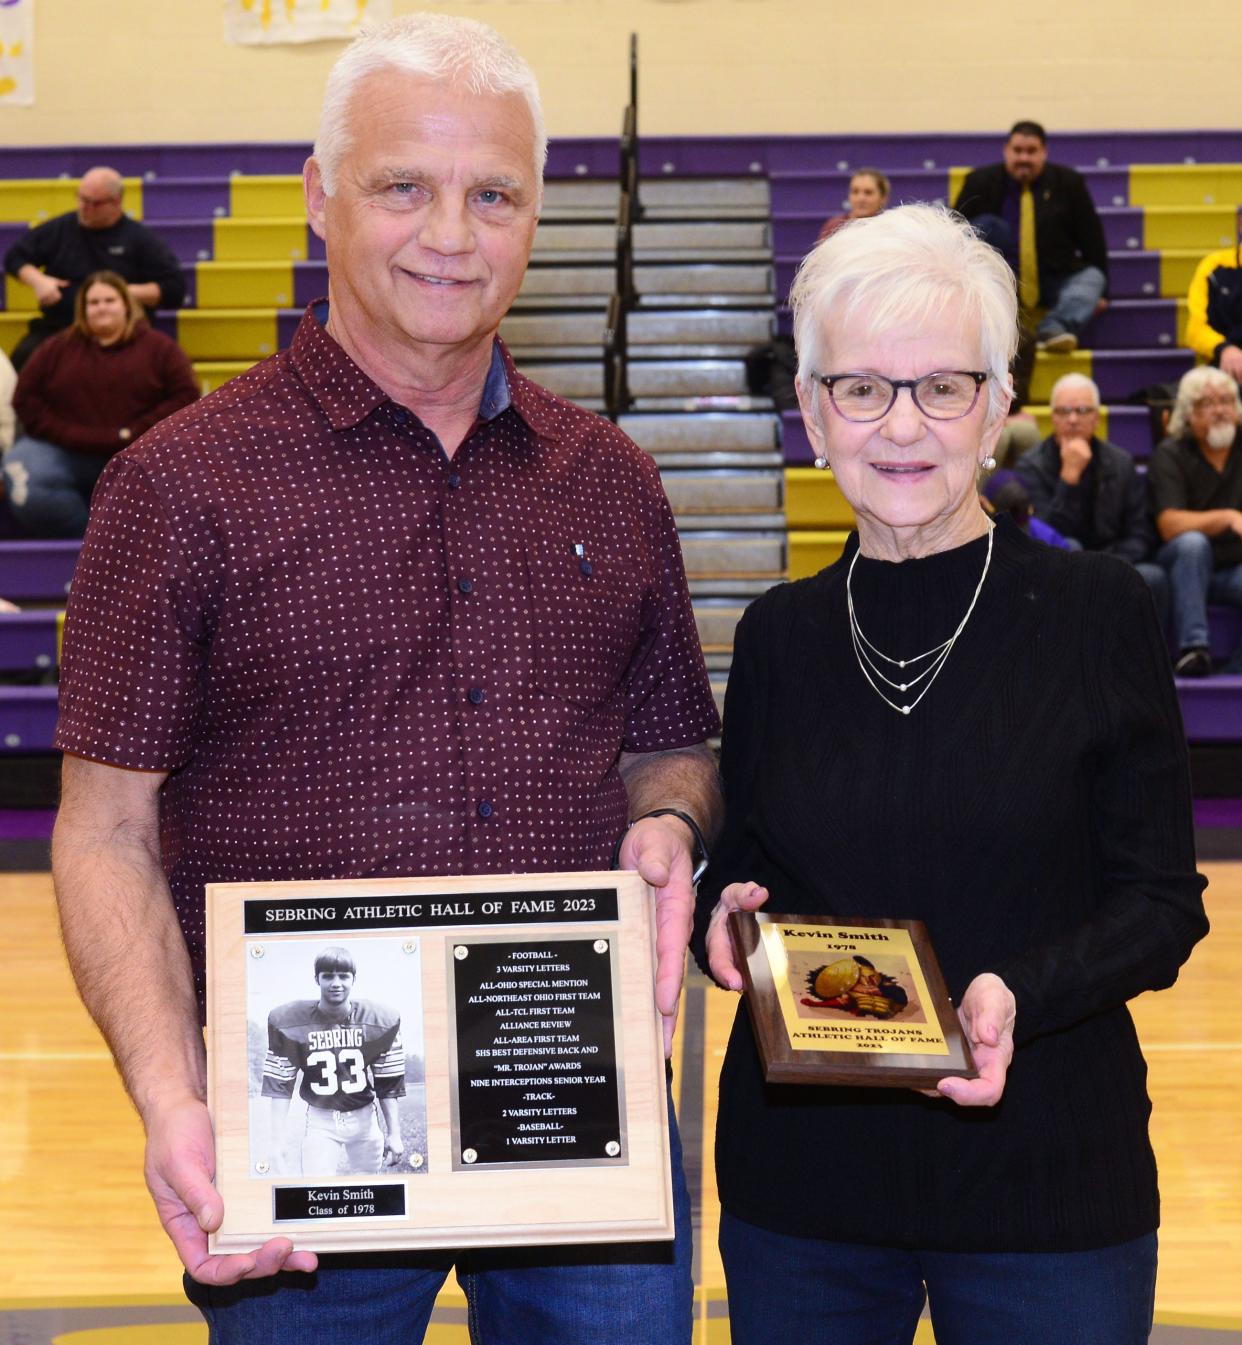 Kevin Smith, left, chose his mother, Diane Smith, as his presenter during his induction into the 2023 Sebring Athletic Hall of Fame ceremony prior to Sebring McKinley's game Friday, Dec. 29, 2023, against Reimer Road Christian at McKinley.